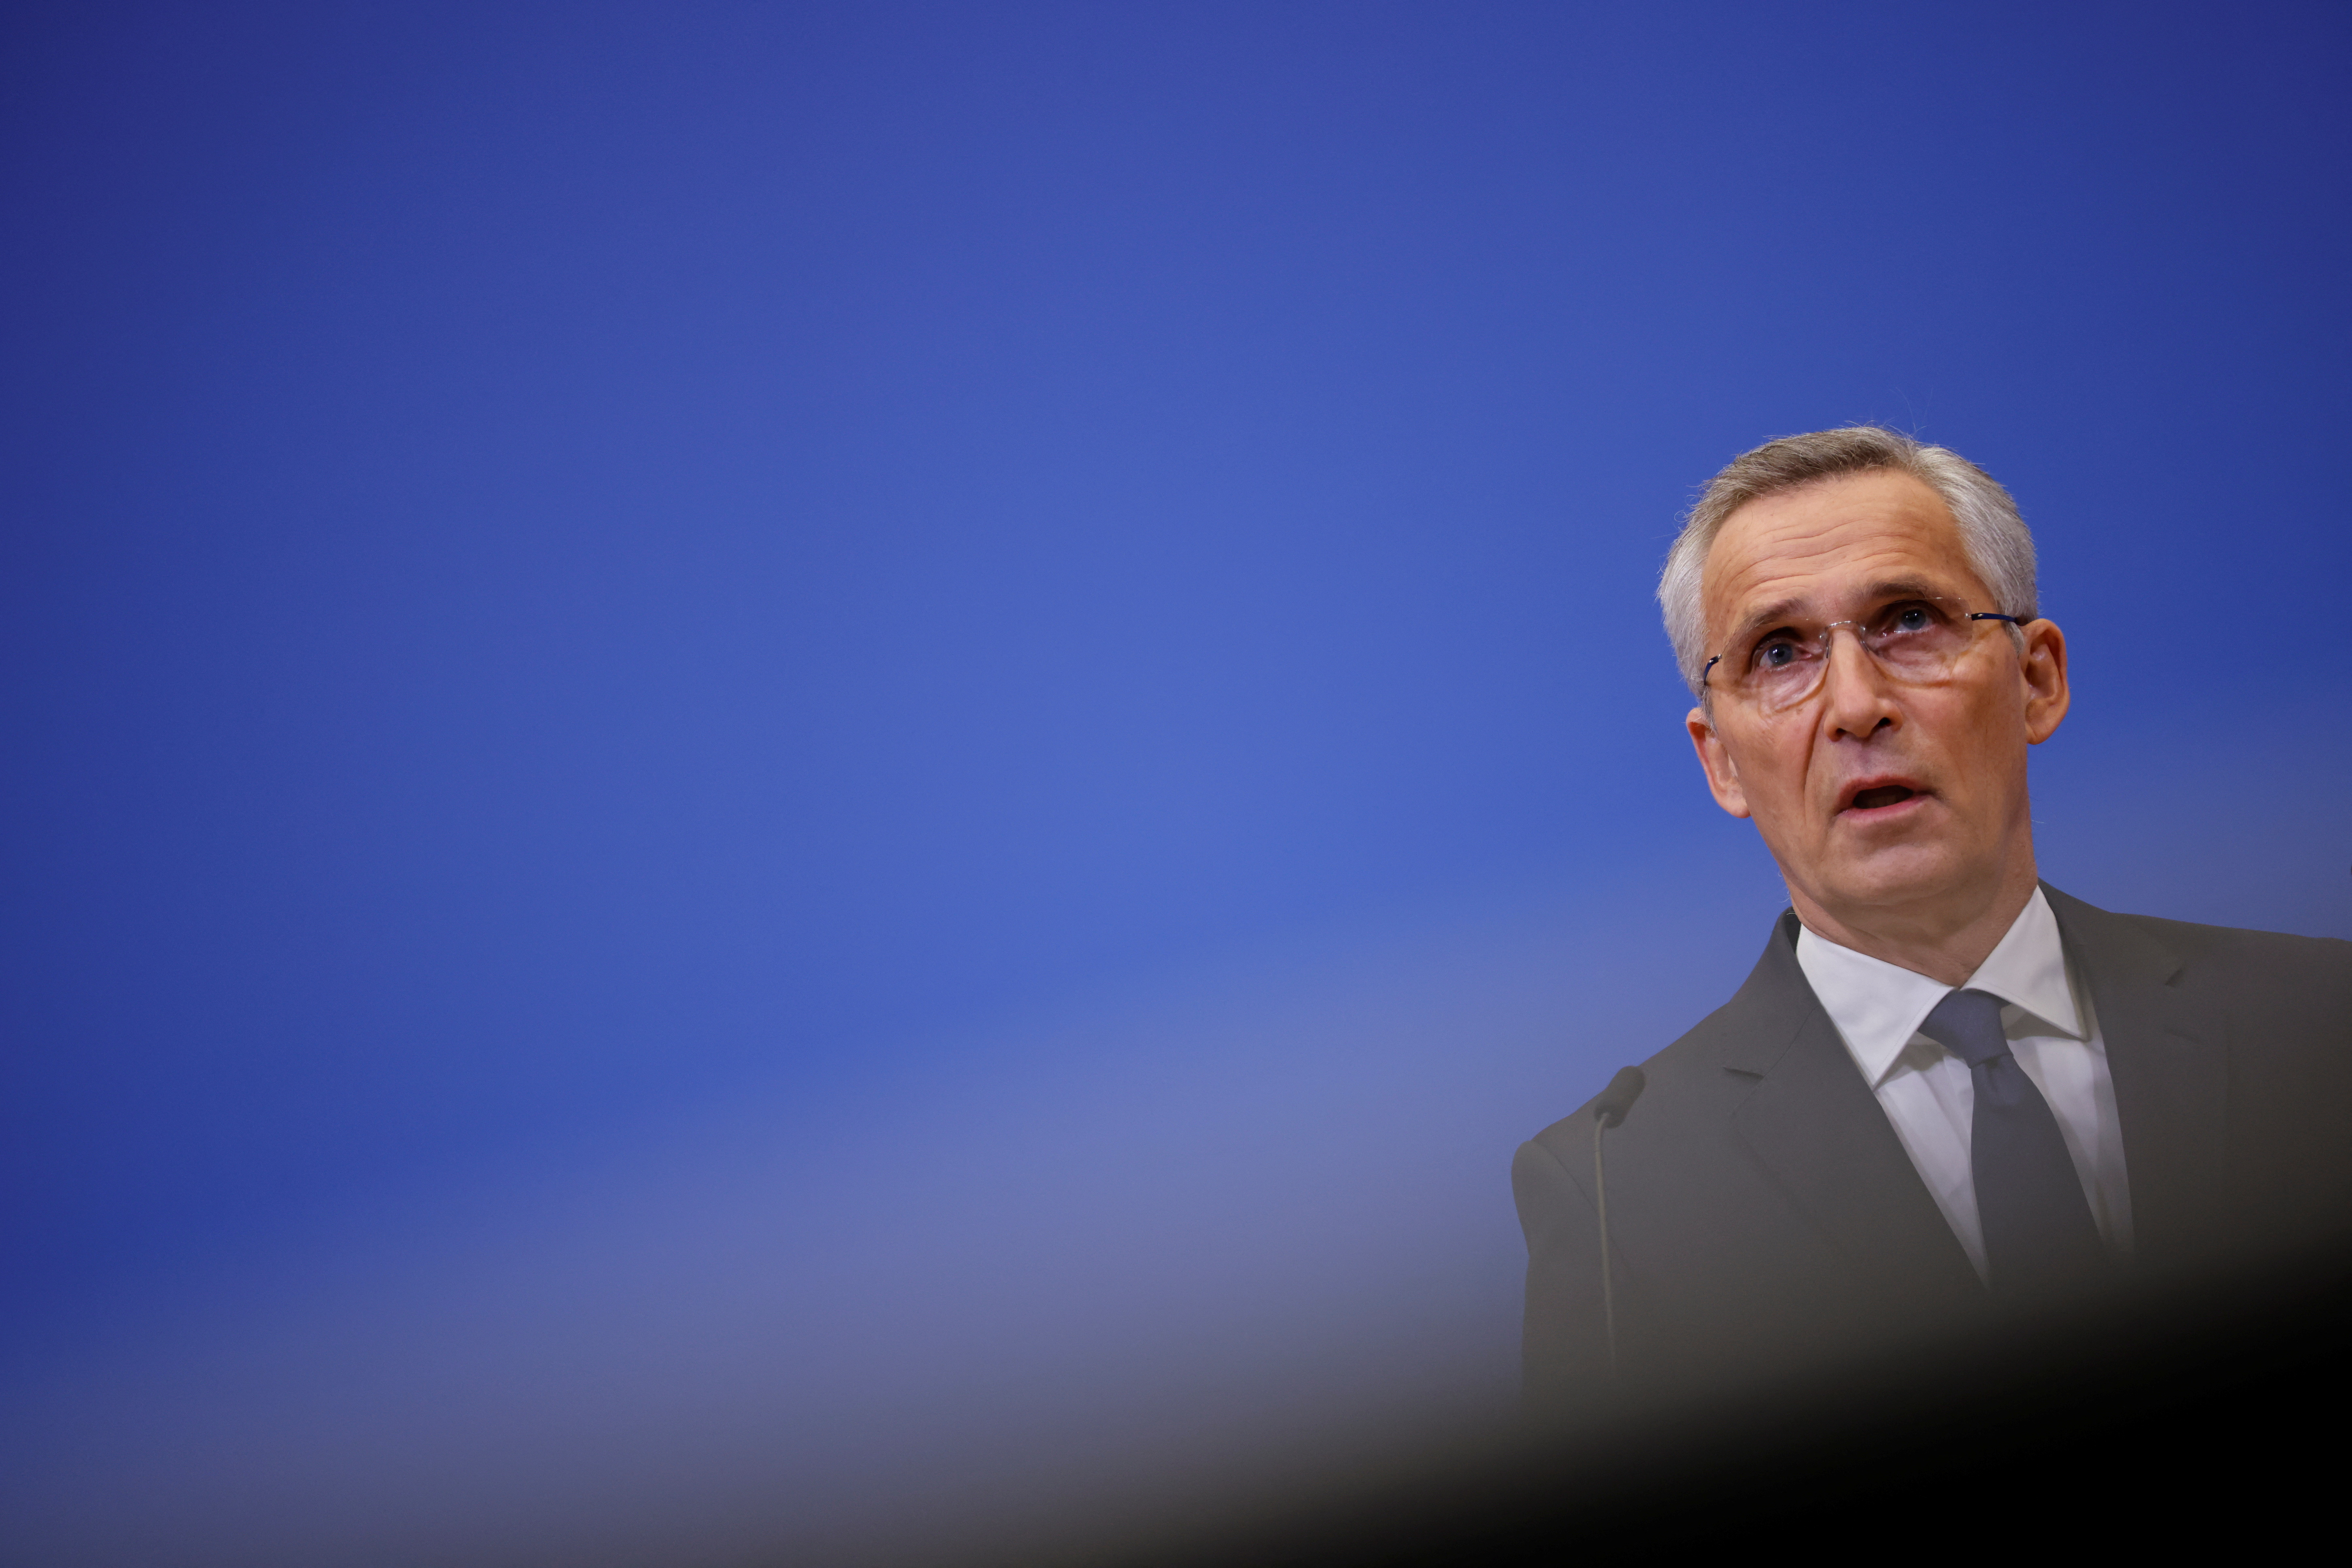 NATO Secretary General Stoltenberg holds press conference in Brussels